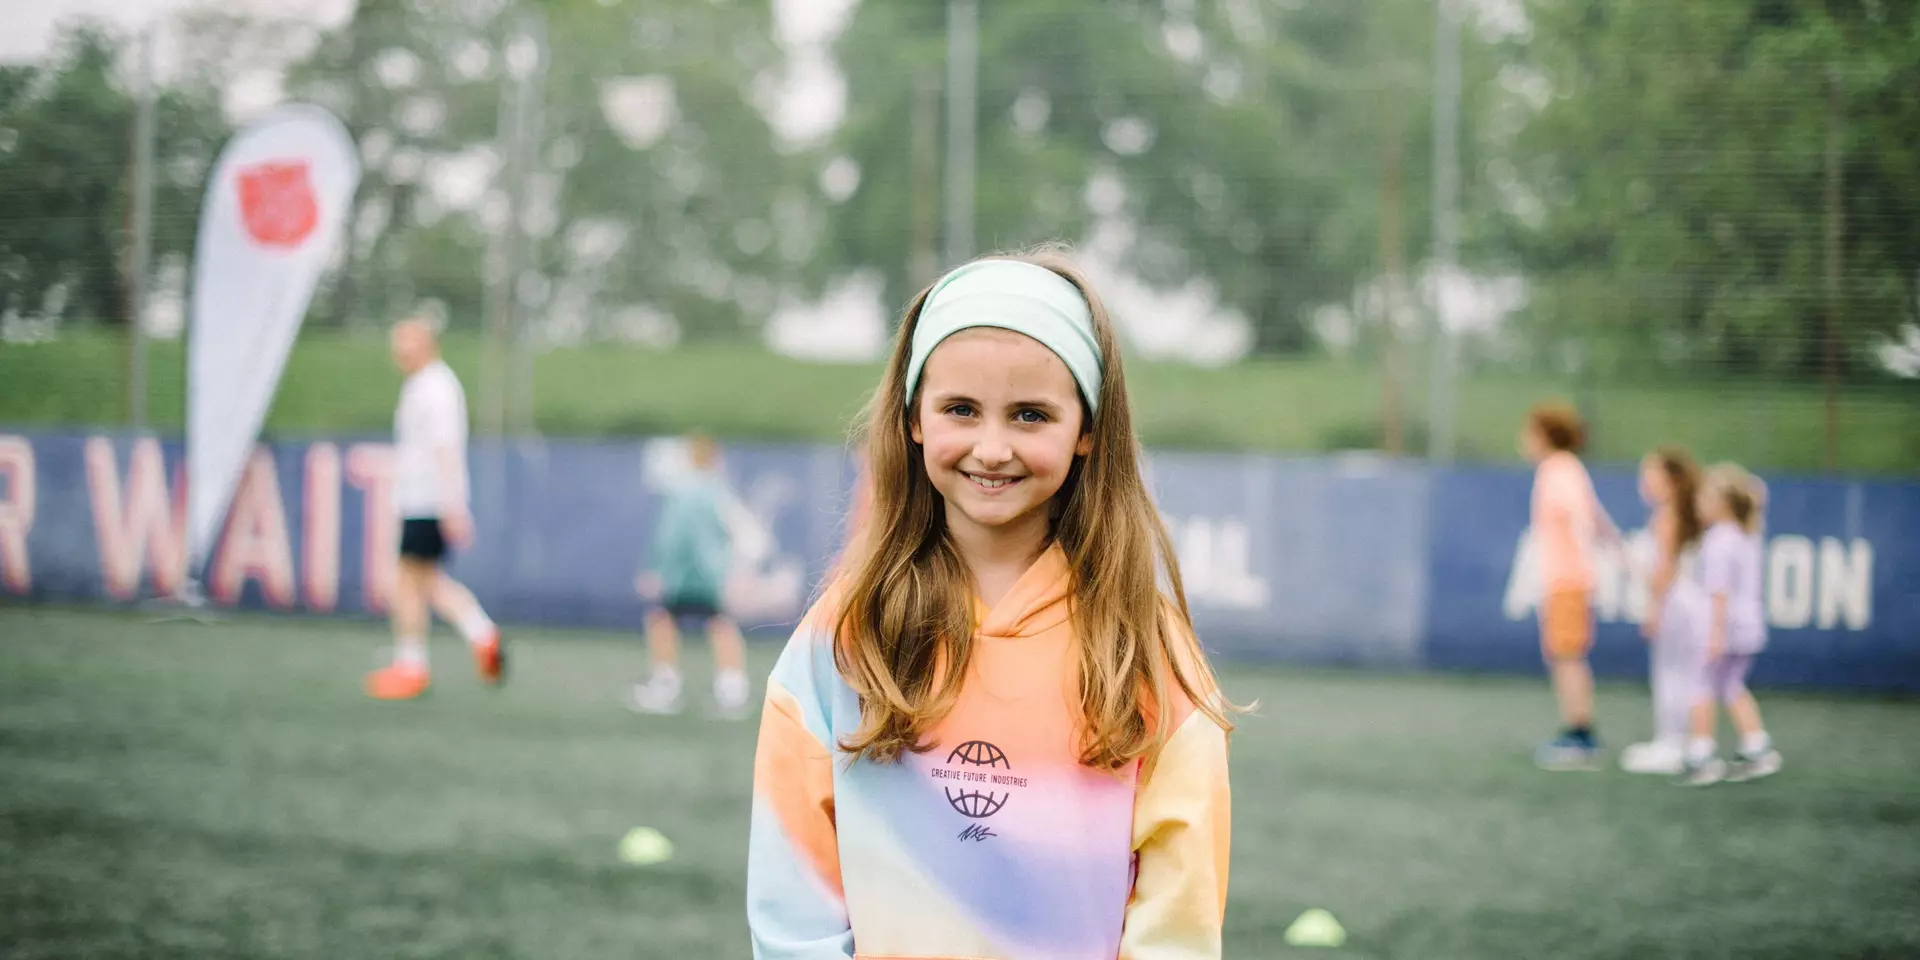 A young girl with a colourful hoodie and a headband, standing on artificial grass with people playing football in the background.